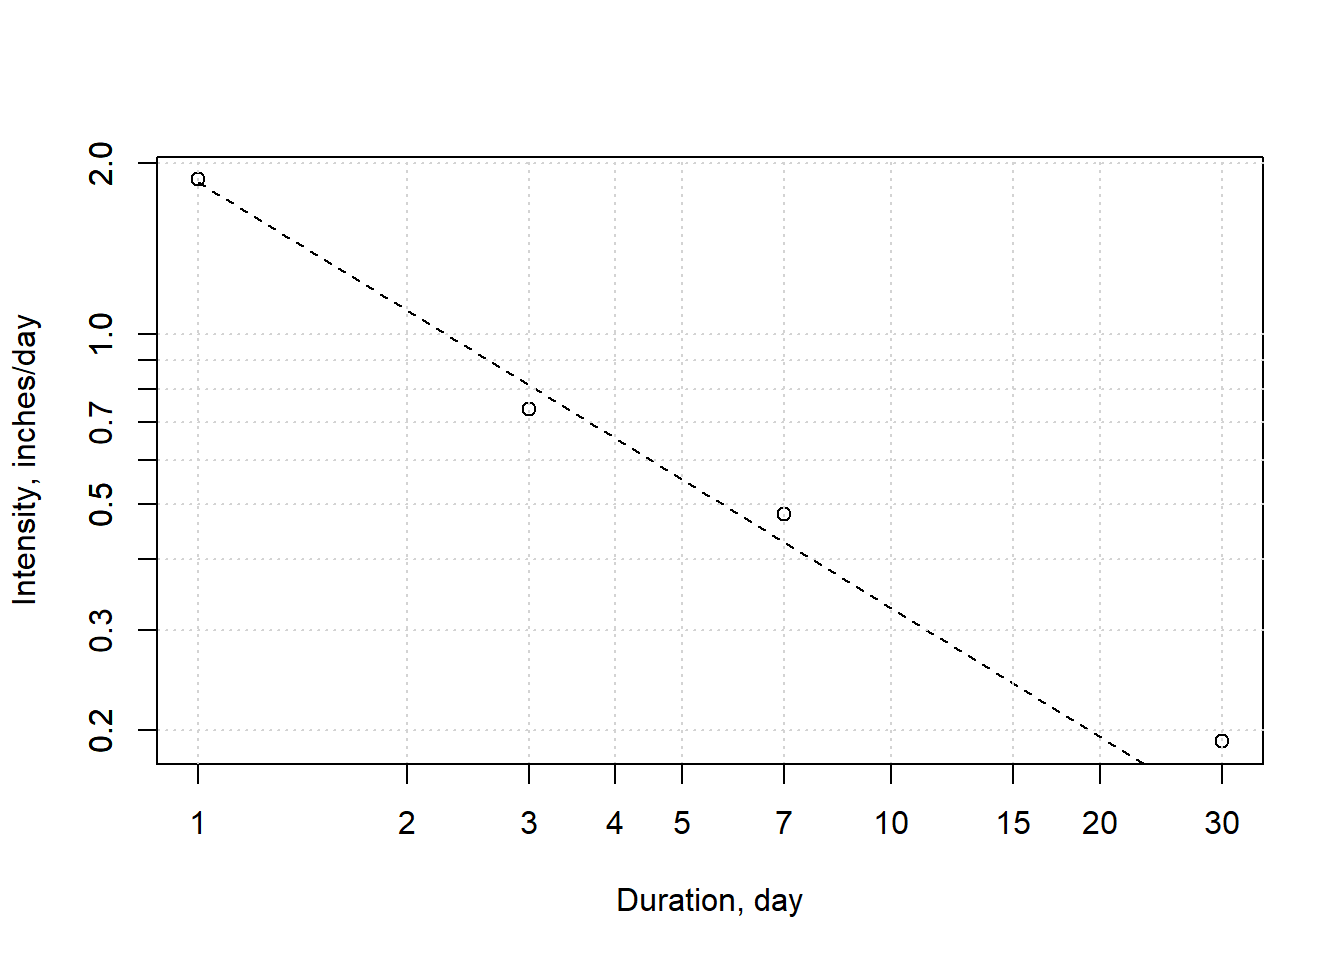 Intensity-duration relationship for water year 2017. Calculated values are based on daily data; theoretical is the power curve fit.